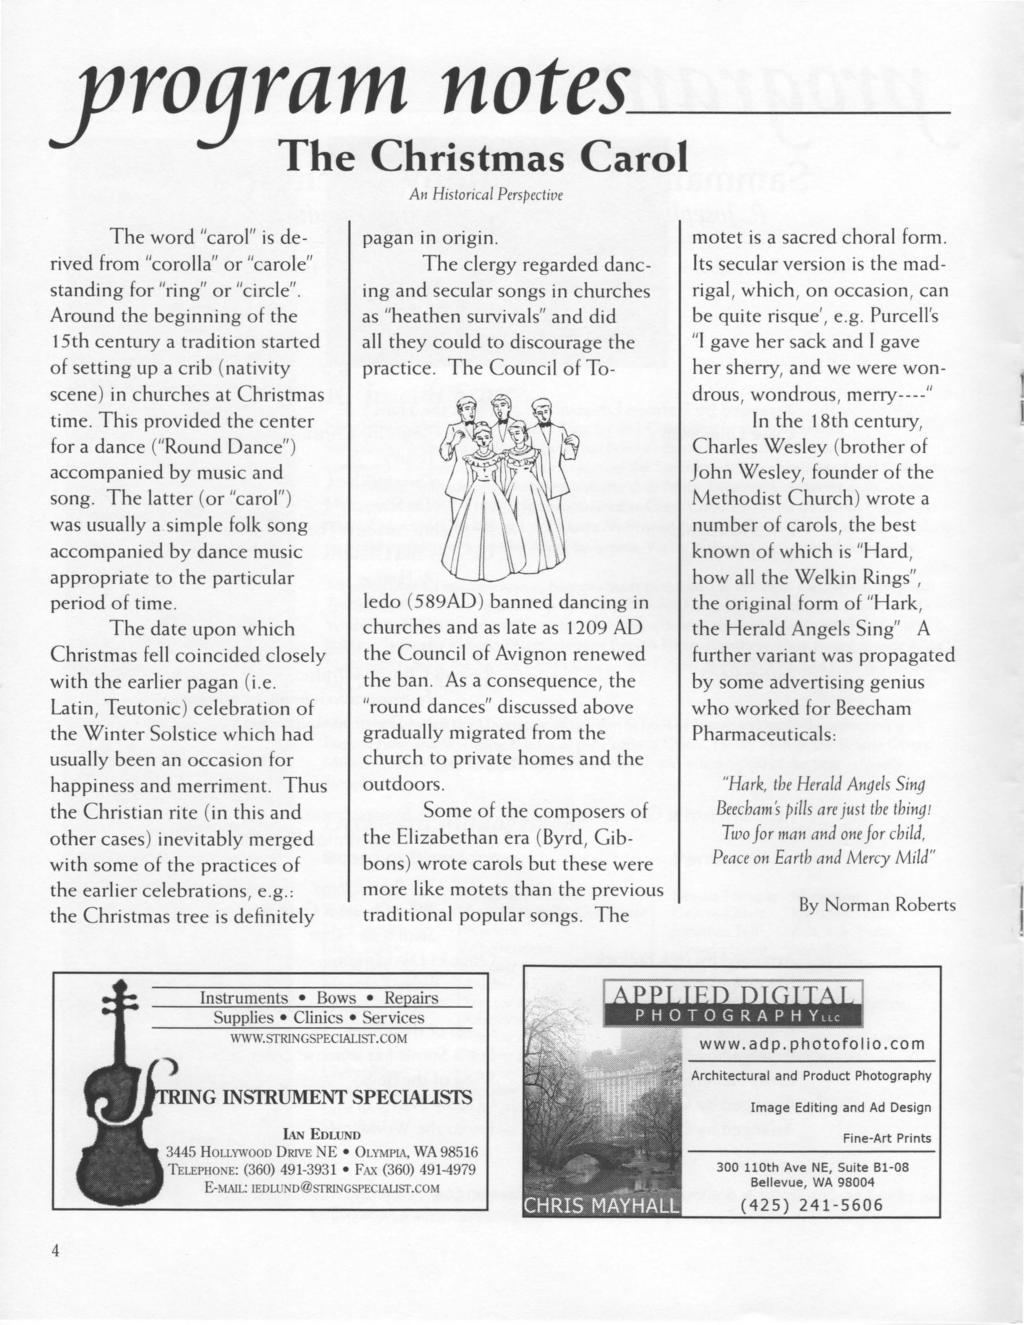 yrogram notes The Christmas Carol An Historical Persp ective The word "carol" is derived from "corolla" or "carole" standing for "ring" or "circle".